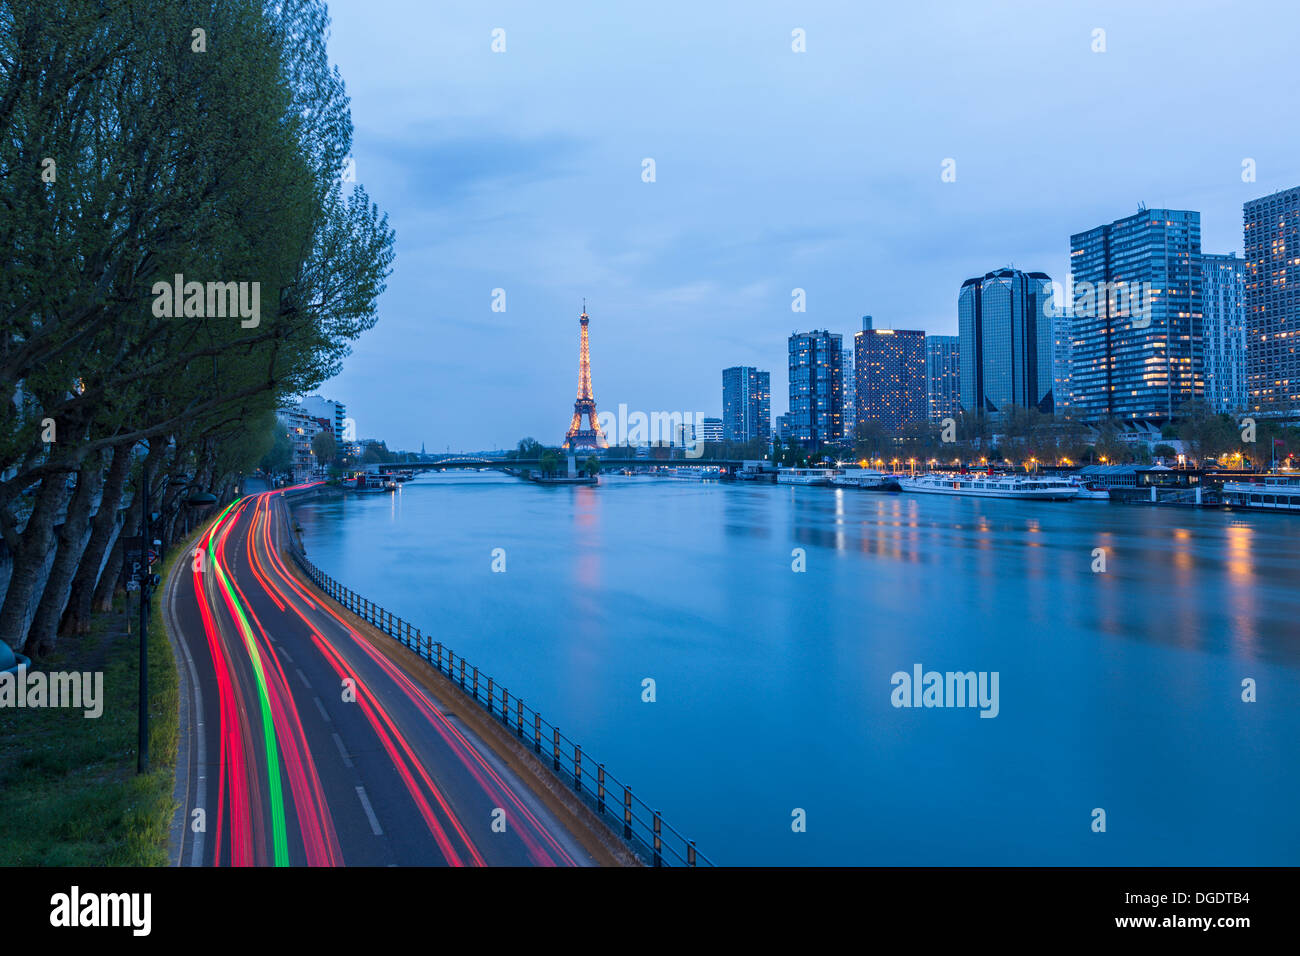 Traffic road scene with Eiffel Tower and River Seine at twilight Paris France Stock Photo